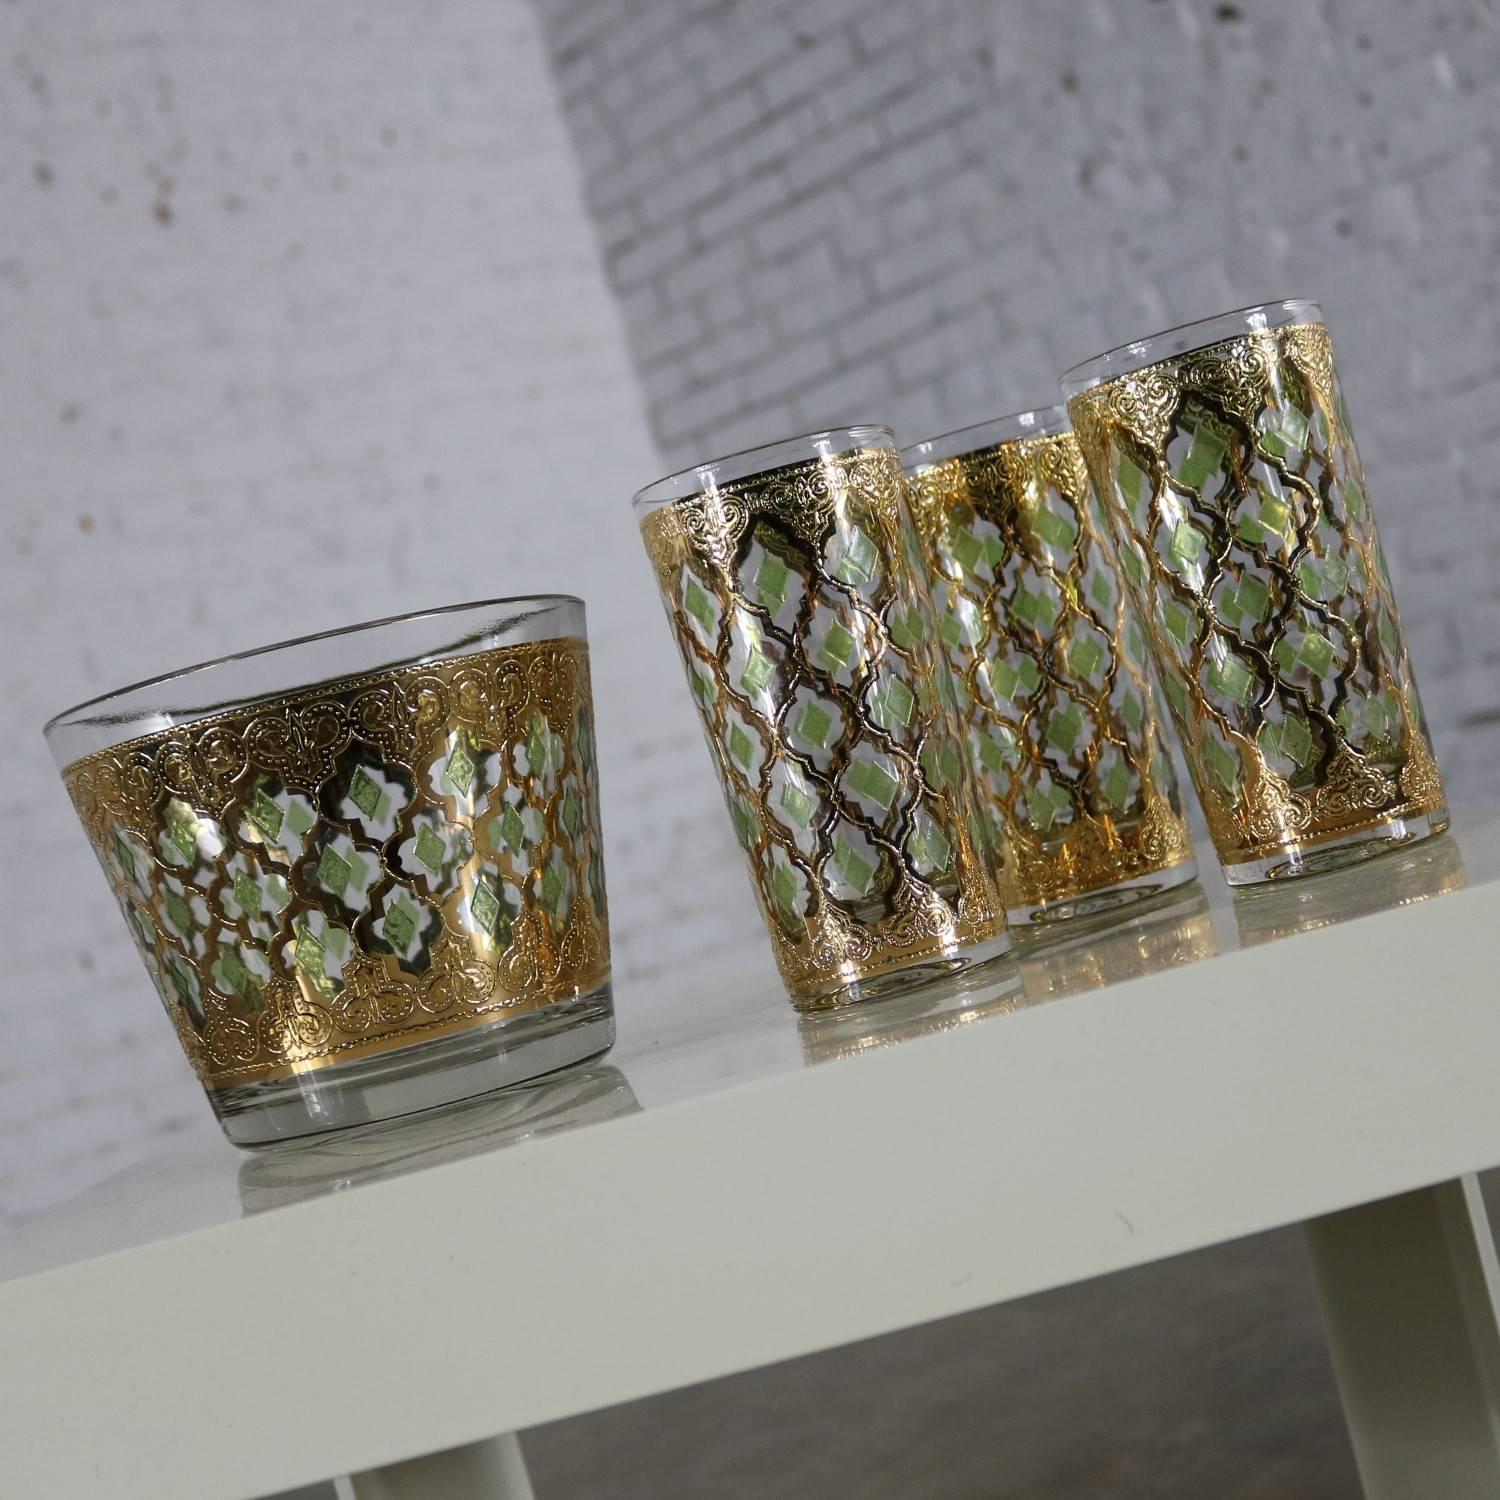 Four beautiful pieces of Culver Glass Company’s Valencia pattern in 22-karat gold. One glass ice bucket or bowl and three highball cocktail glasses. These are all in wonderful vintage condition apart from missing gold to the upper ring of the gold